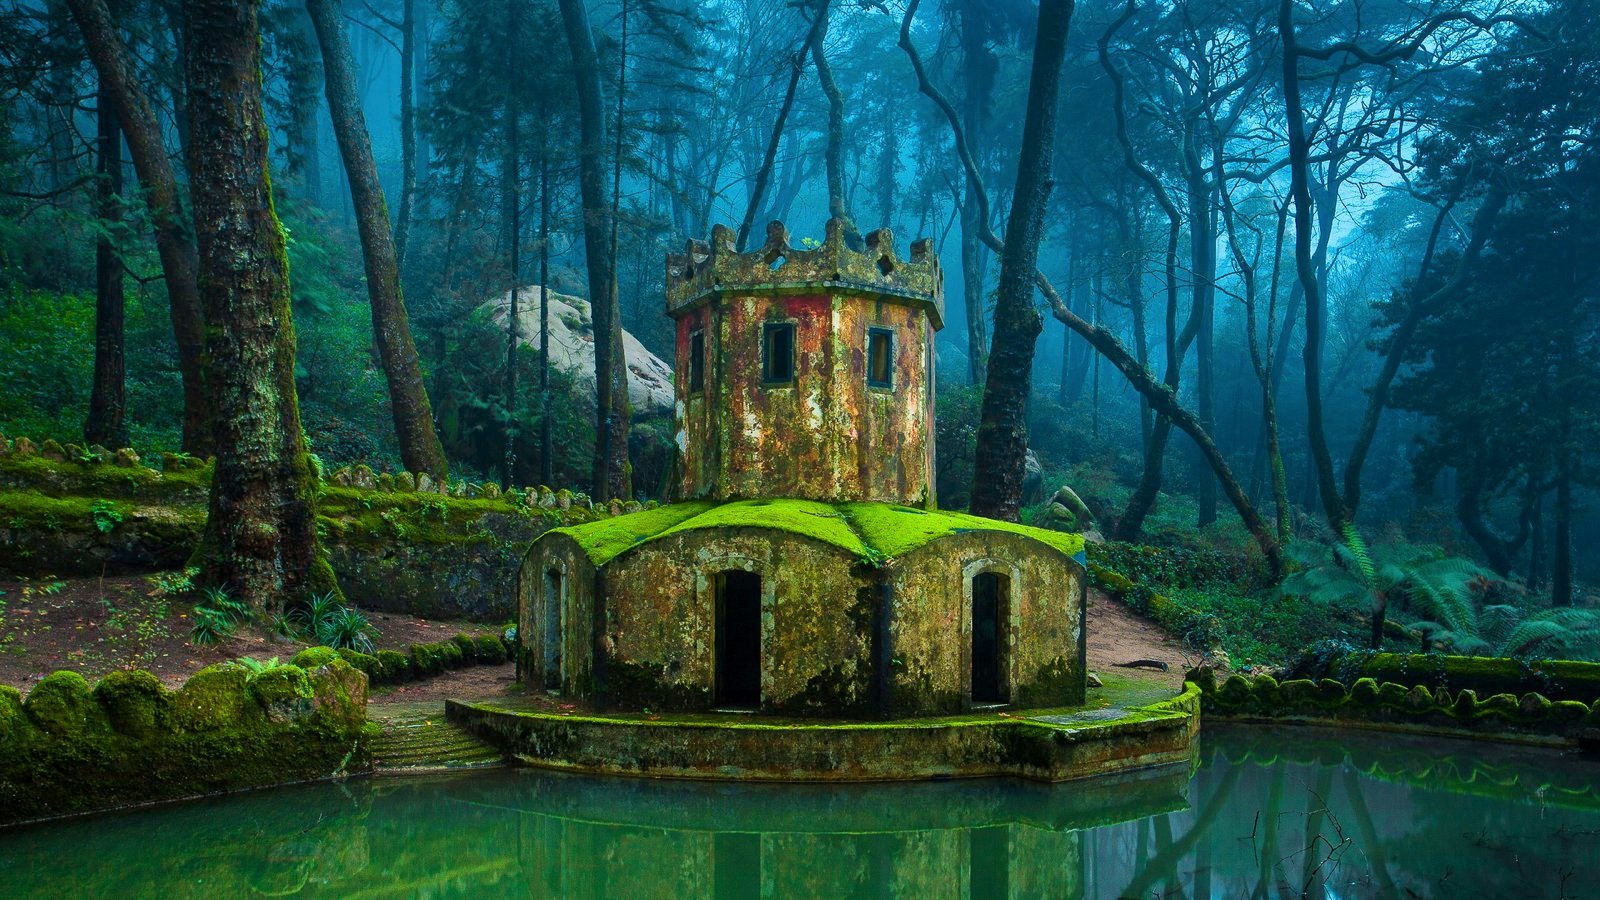 4. The ruins of an old castle in Sintra, Portugal